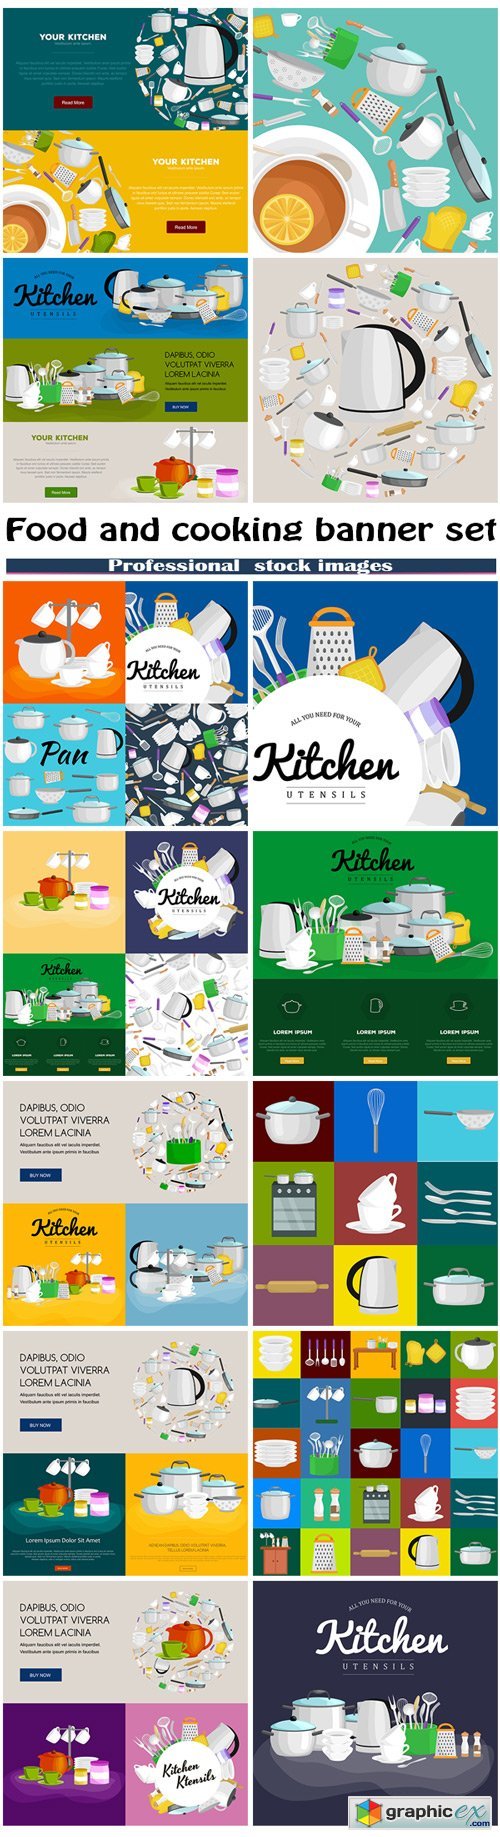 Food and cooking banner set and kitchenware utensils